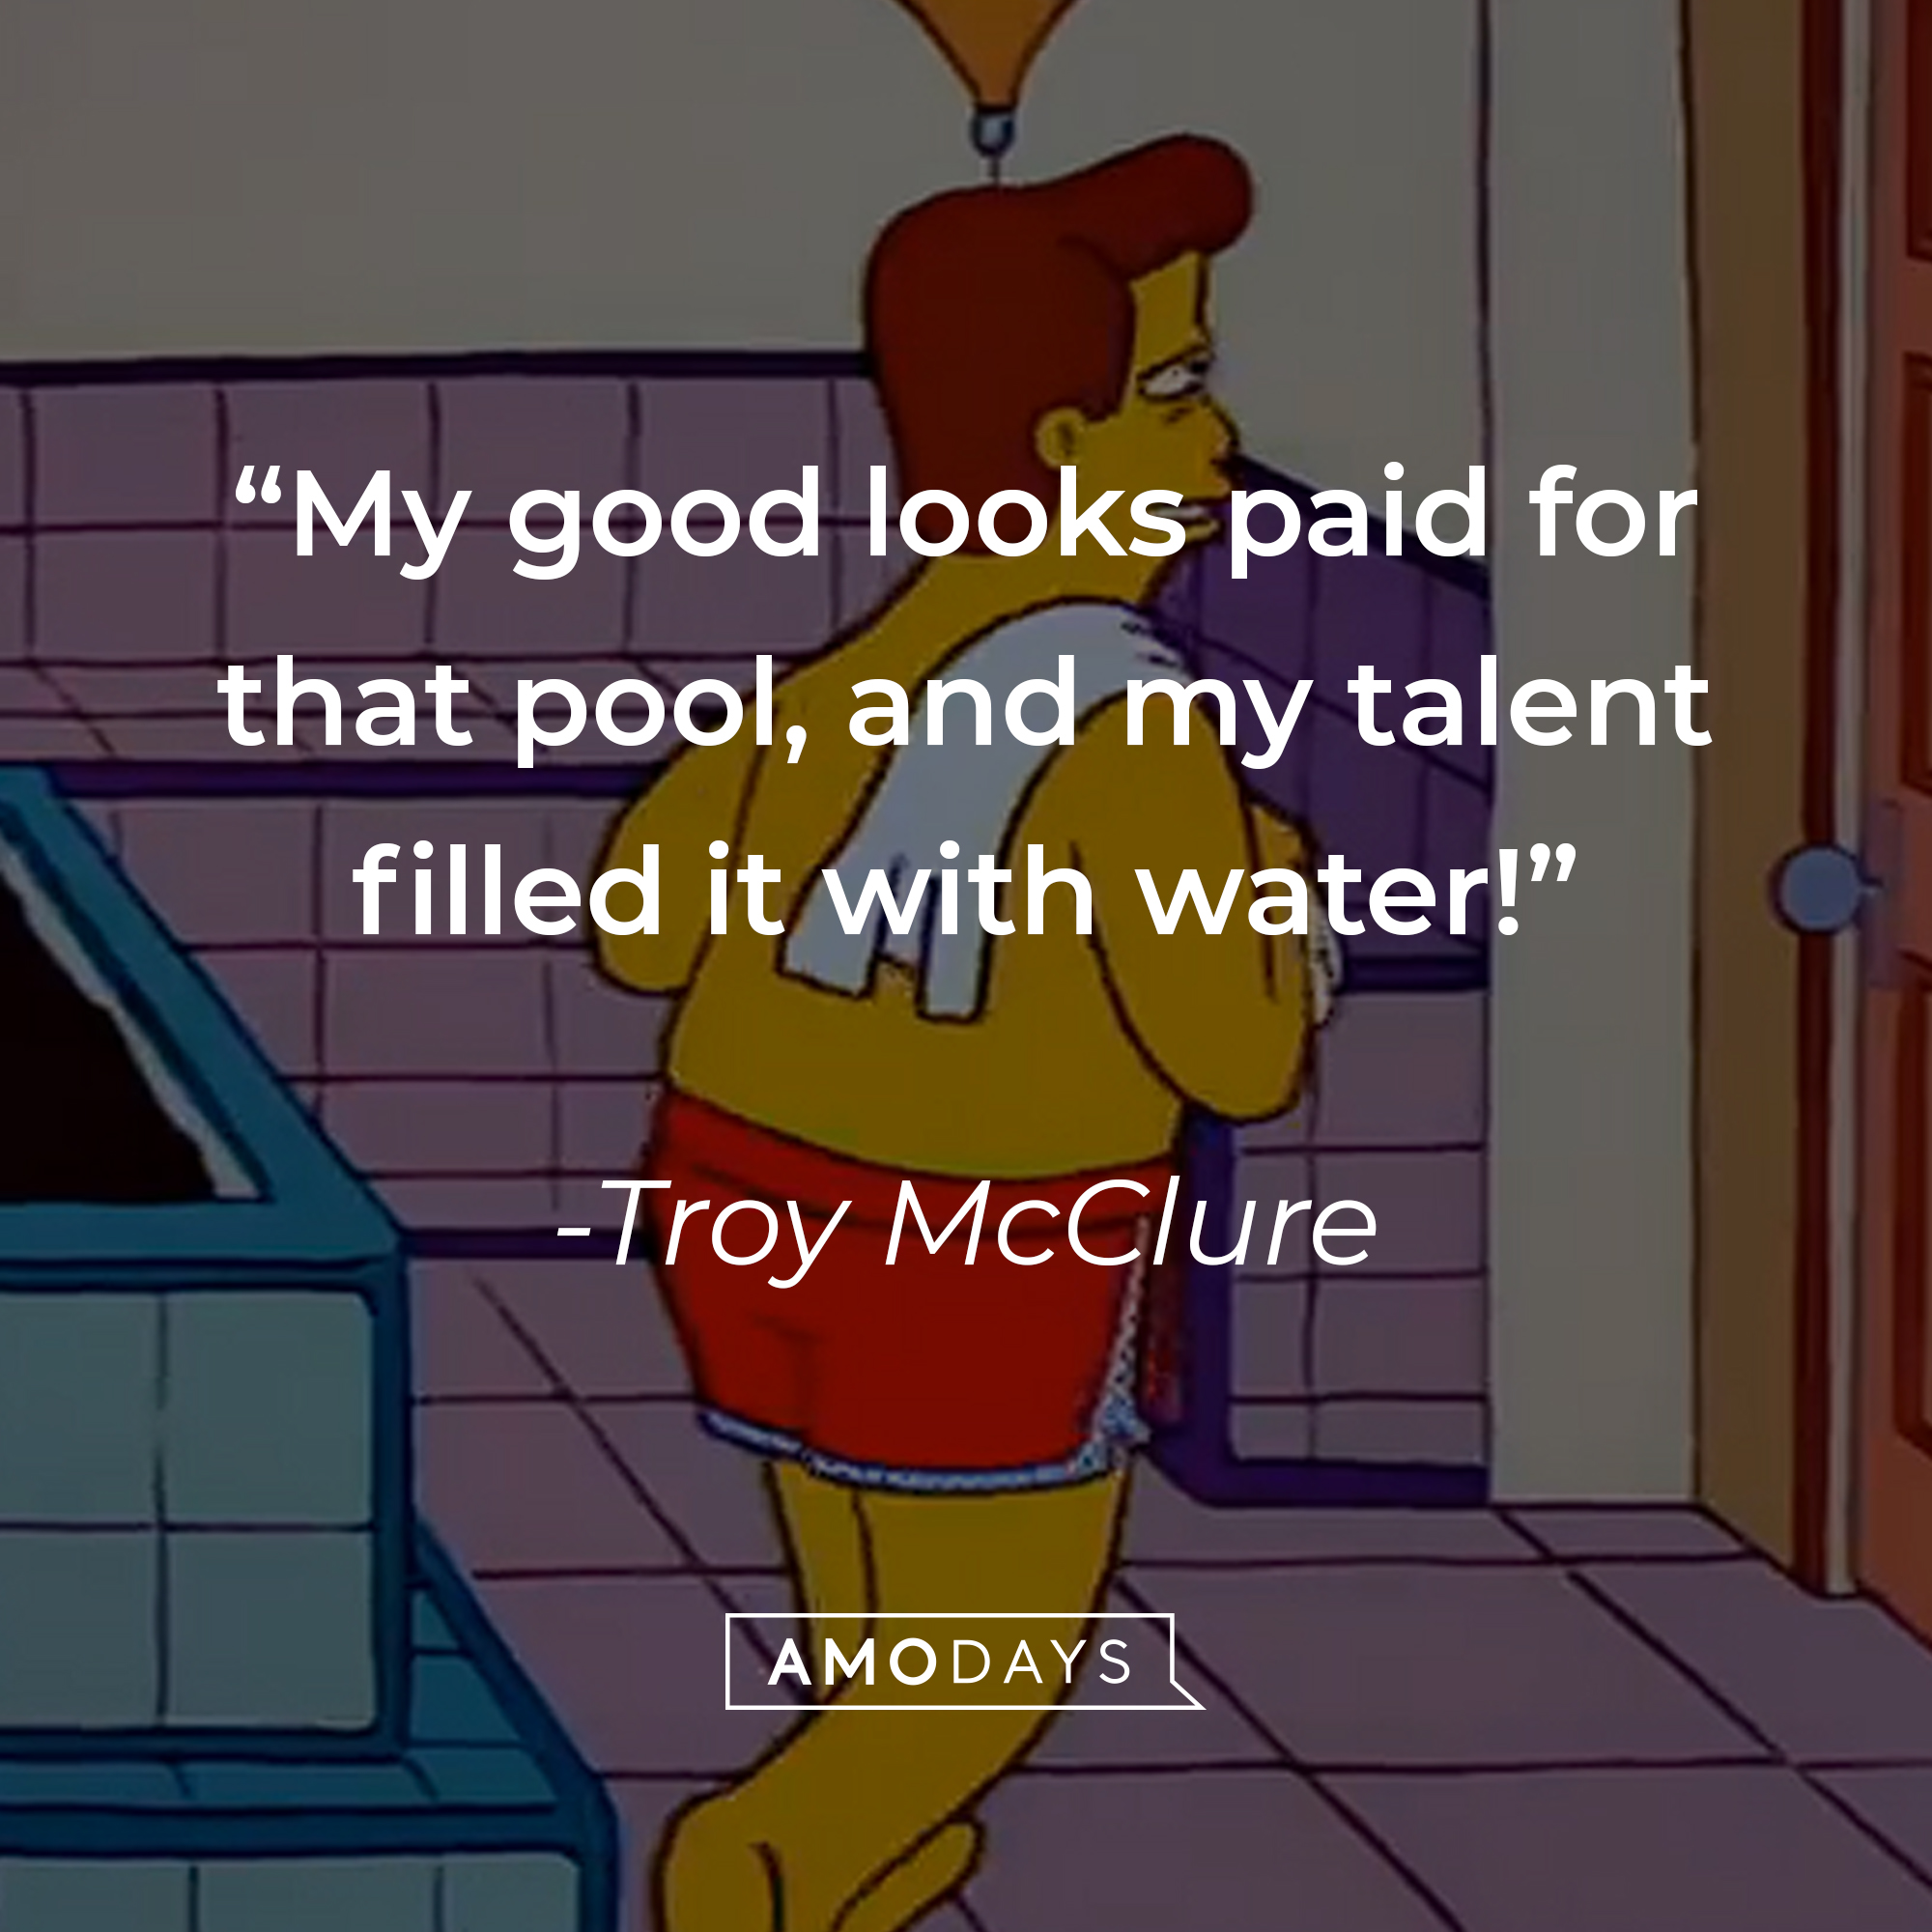 Troy McClure, with his quote: “My good looks paid for that pool, and my talent filled it with water!” | Source: facebook.com/TheSimpsons